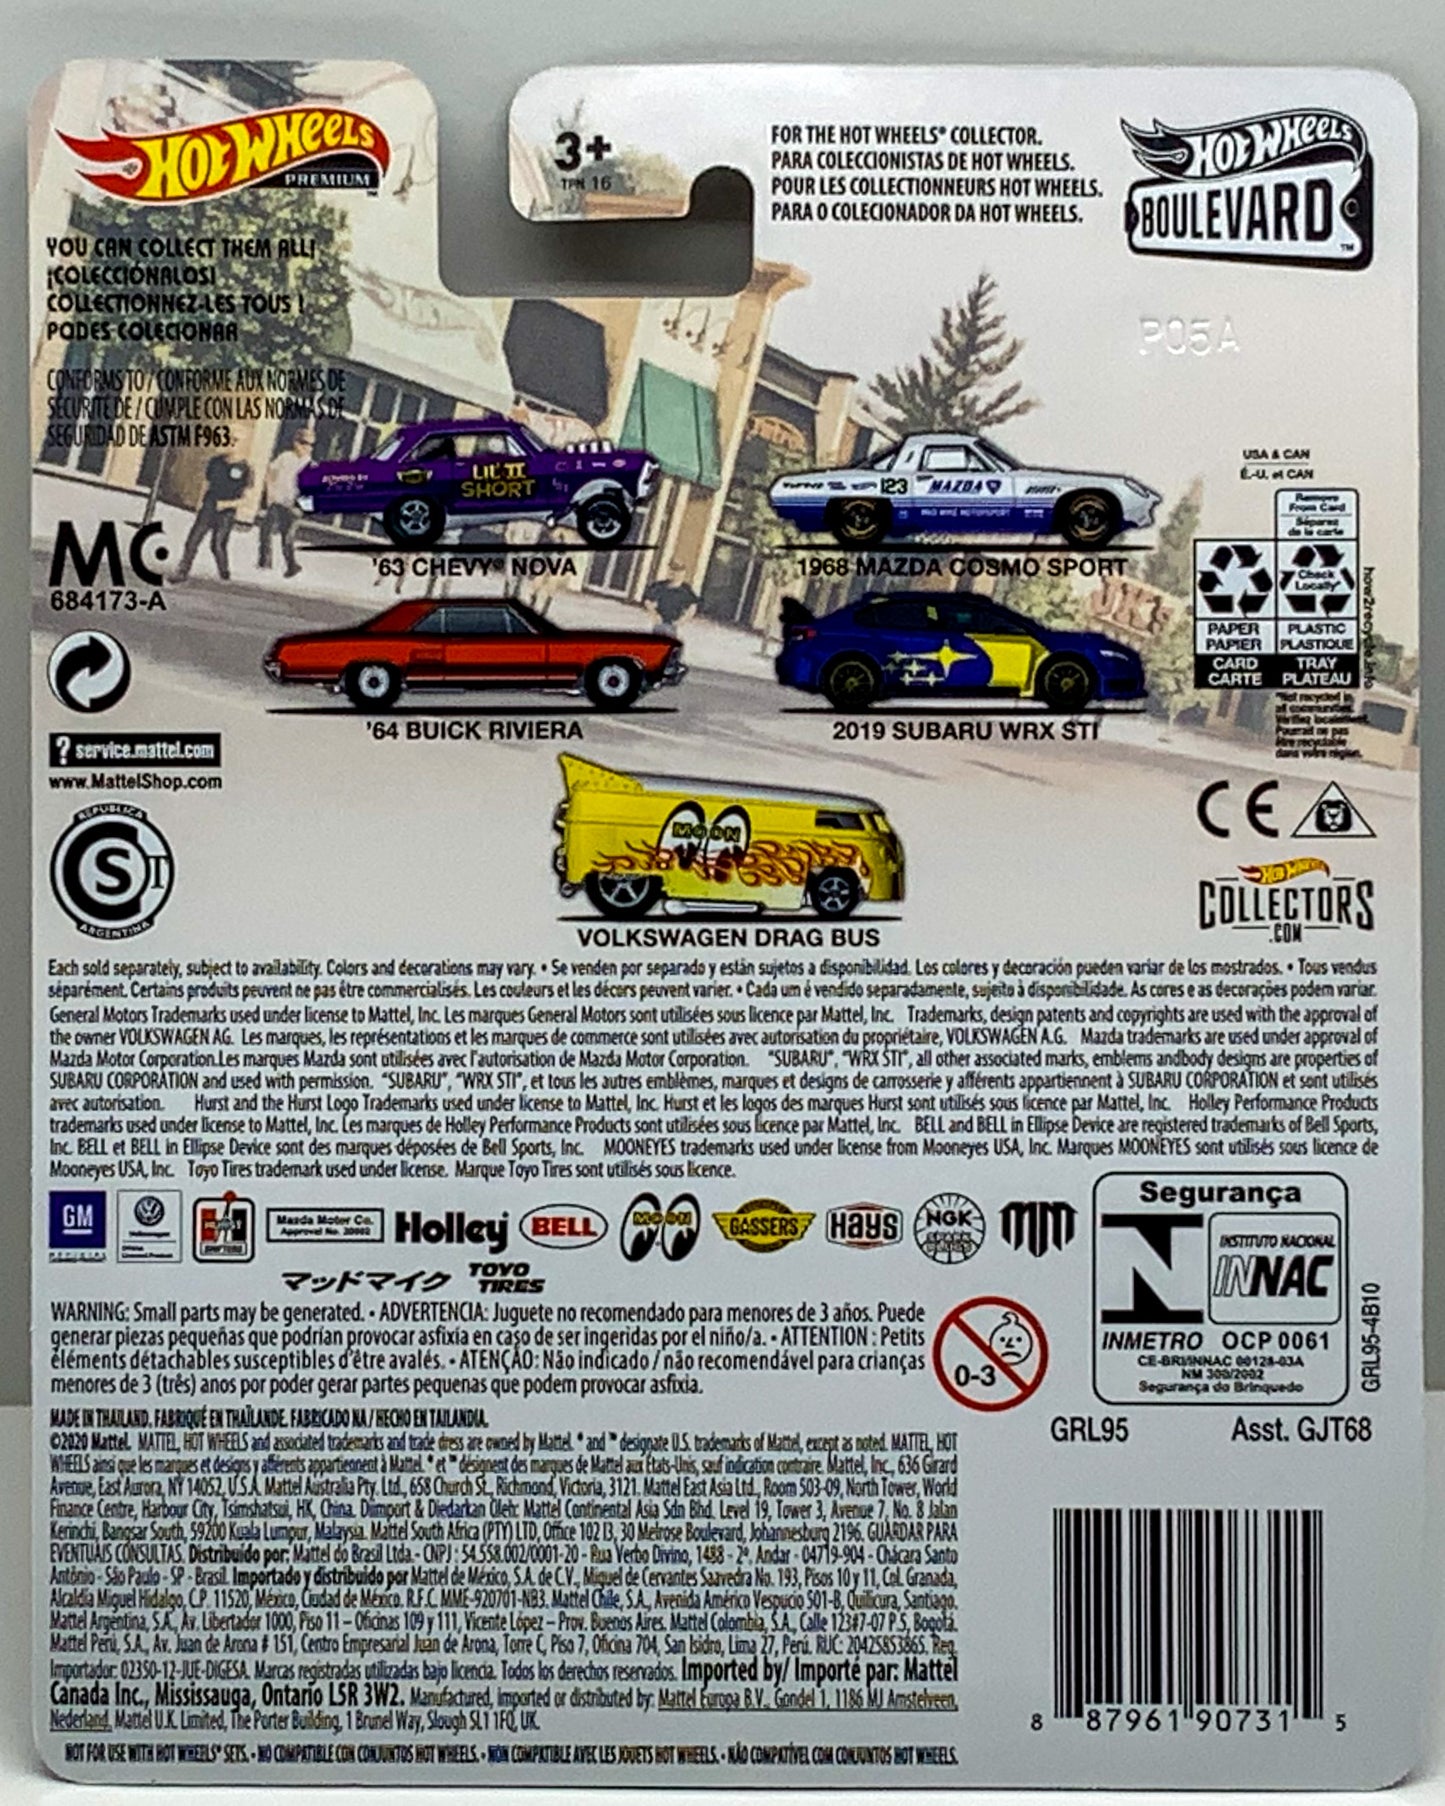 Buy at Tatoy Shop Back of Card shows the 5 Cars on Series Chevy Buick Mazda Subaru Volkswagen Collections